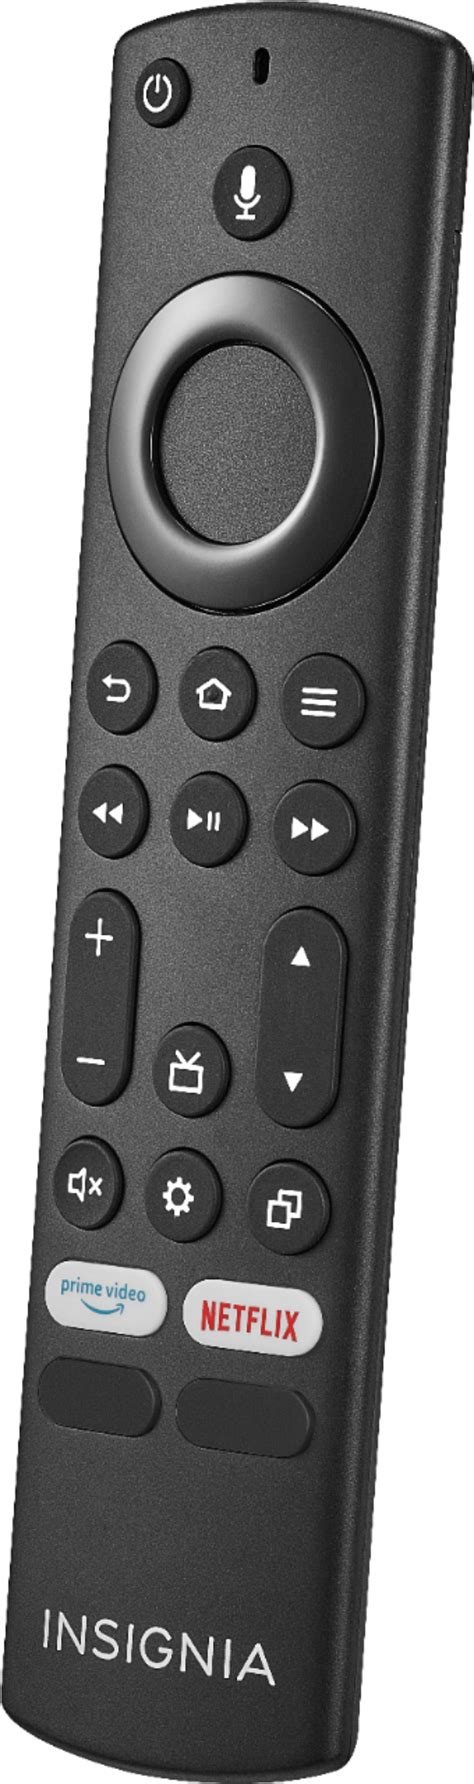 Insignia ROKU TV Remote w/Volume Control & TV Power Button for All Insignia Roku TV NO Pairing NOT for Roku Player (Box) NOT for Roku Stick!! Infrared 4.6 out of 5 stars 2,169. 